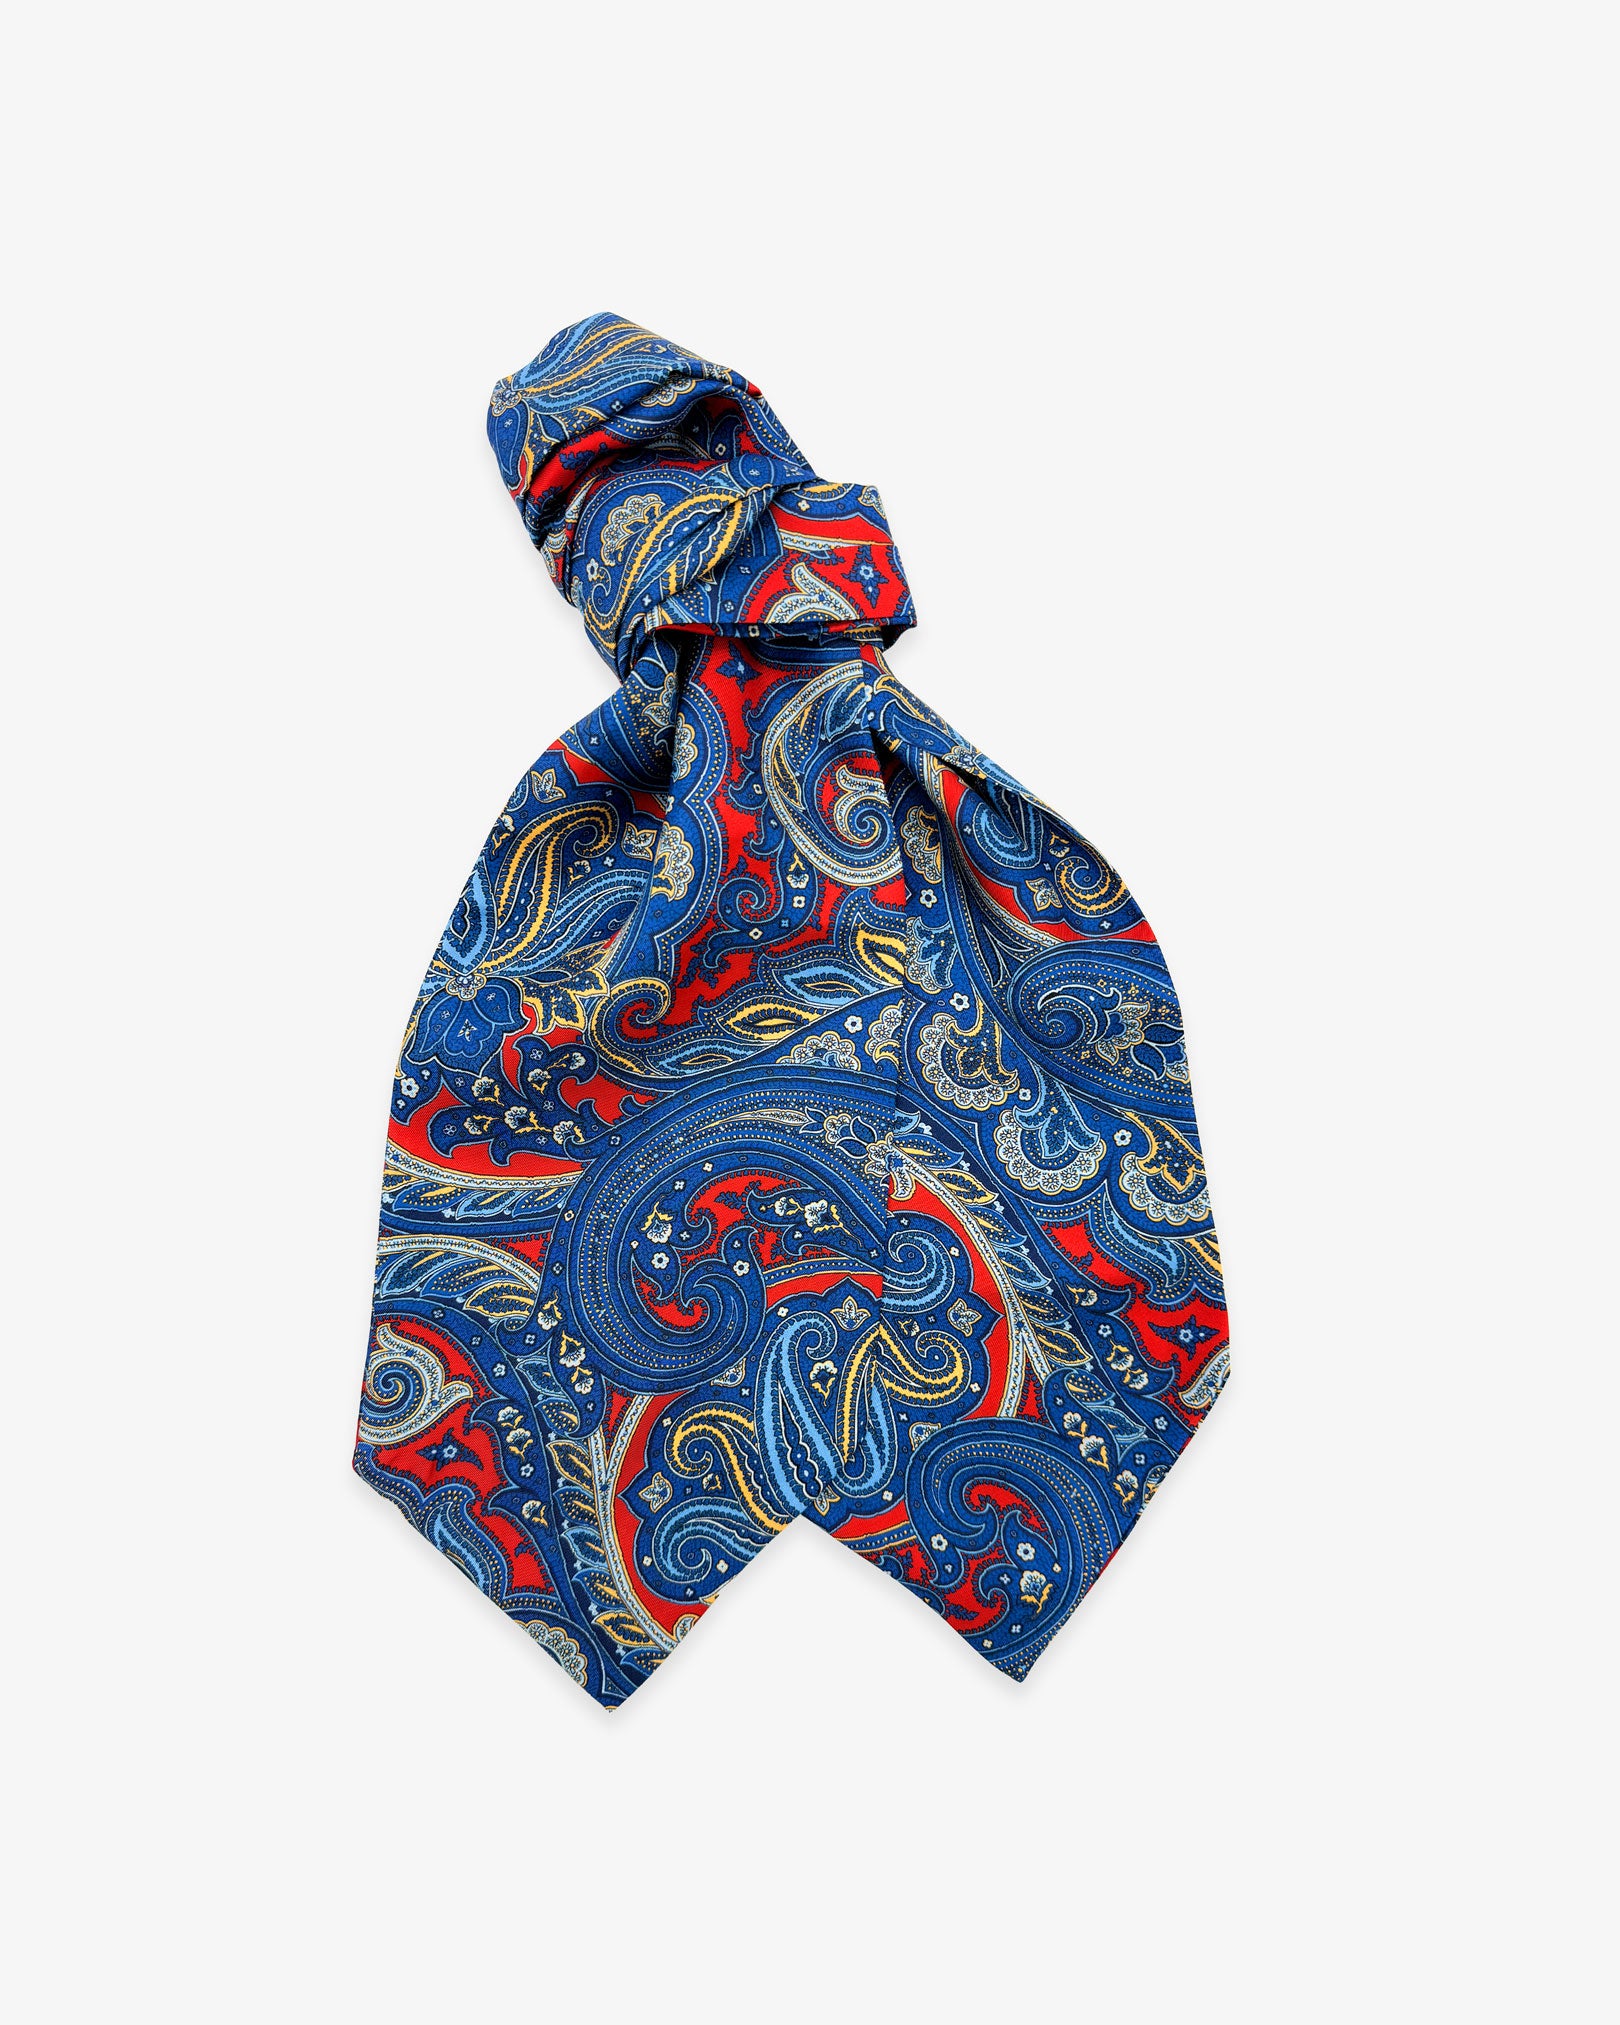 The Oxford double Ascot tie with wide ends at the bottom and clear view of the blue paisley patterns against a deep red ground.